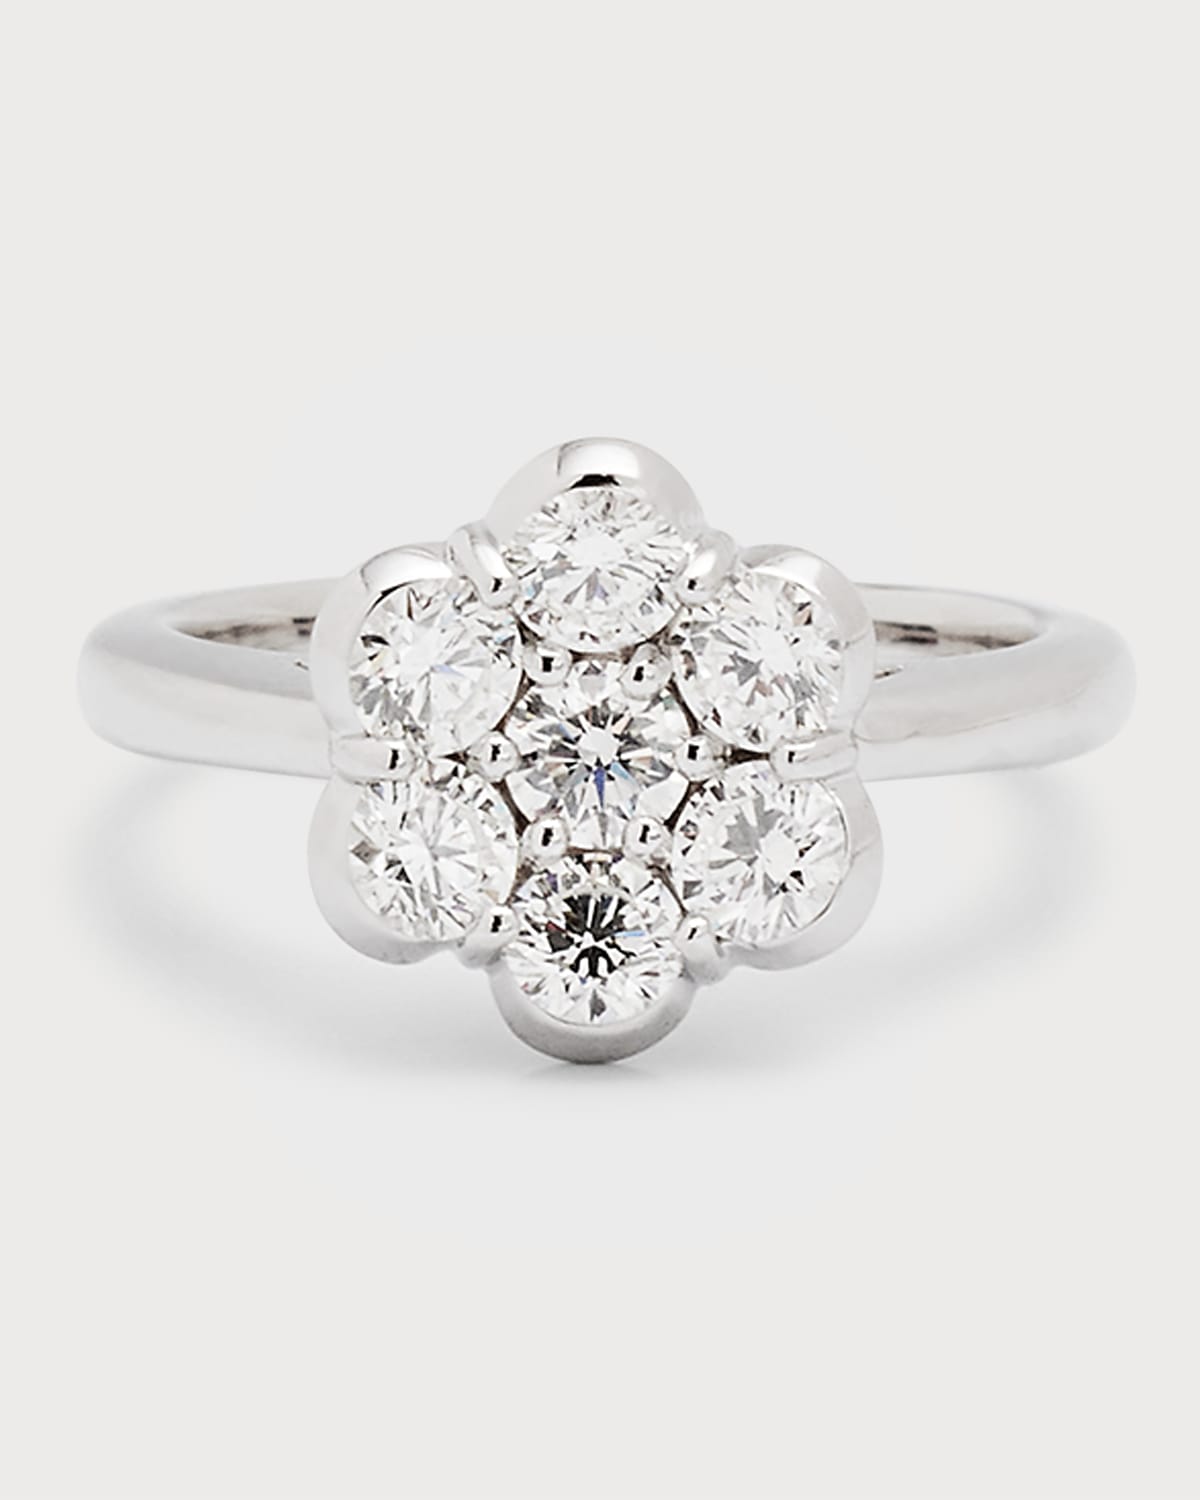 18k White Gold Flower Diamond Ring, Size 6 and 7